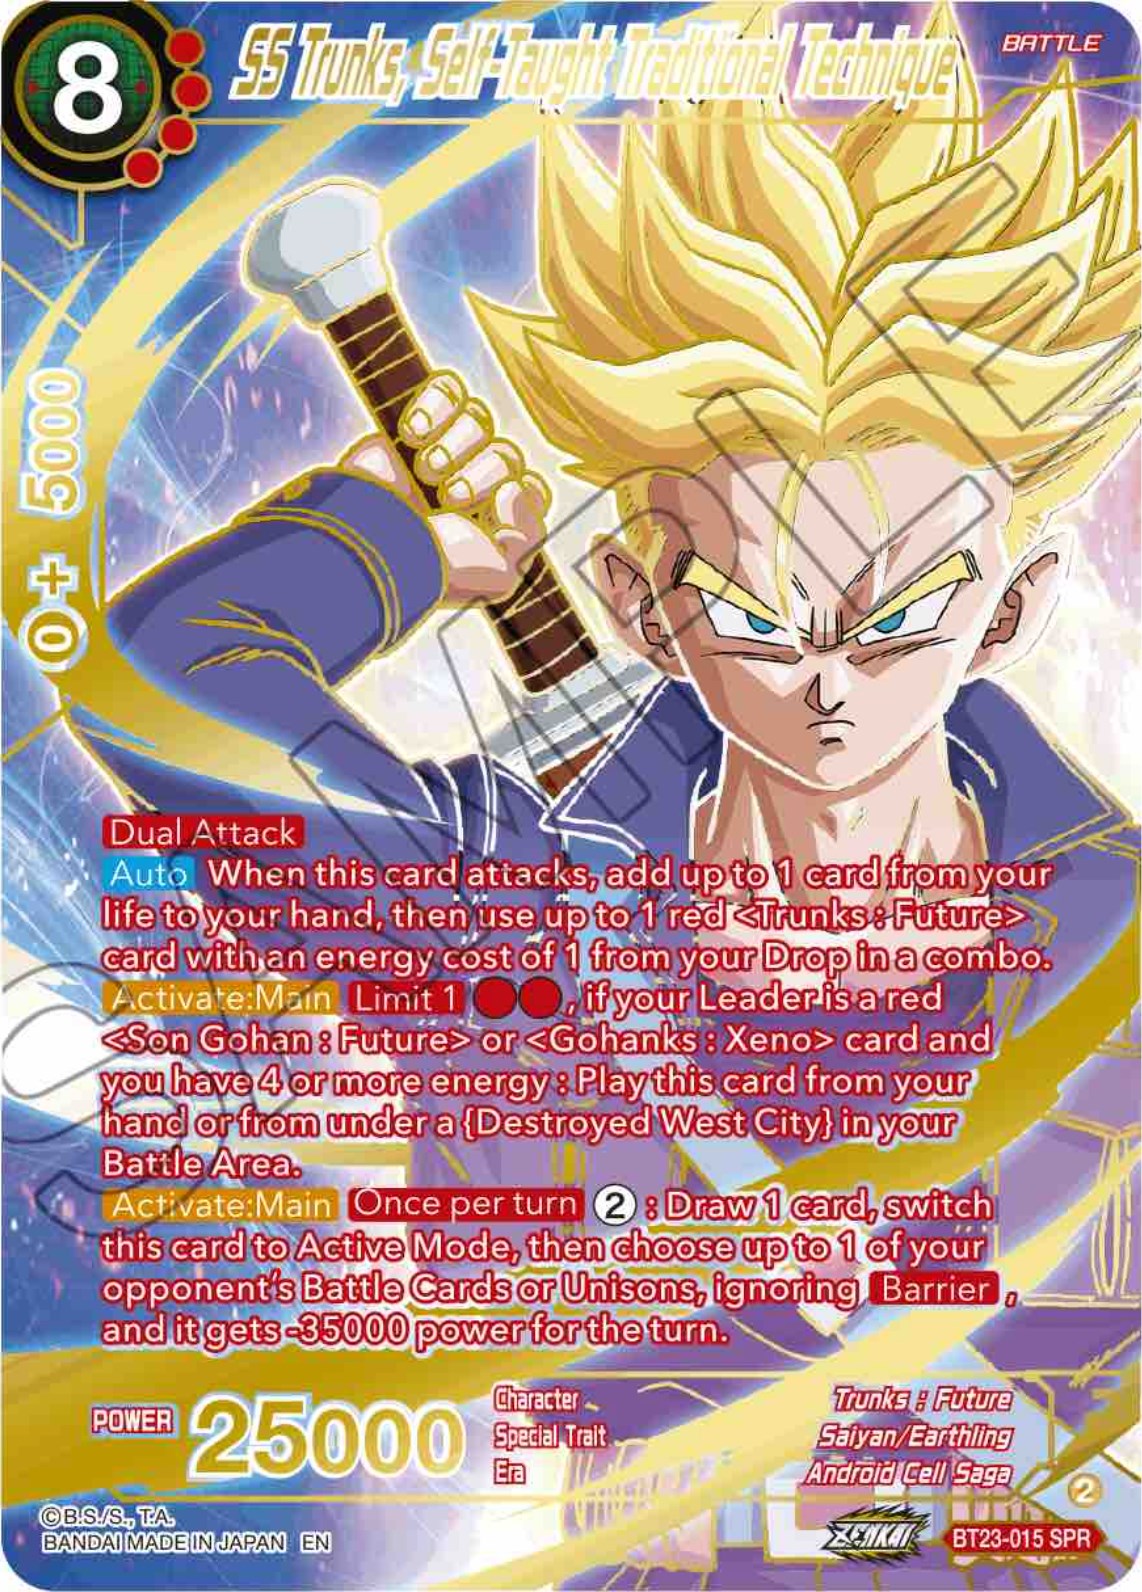 SS Trunks, Self-Taught Traditional Technique (SPR) (BT23-015) [Perfect Combination] | Pegasus Games WI